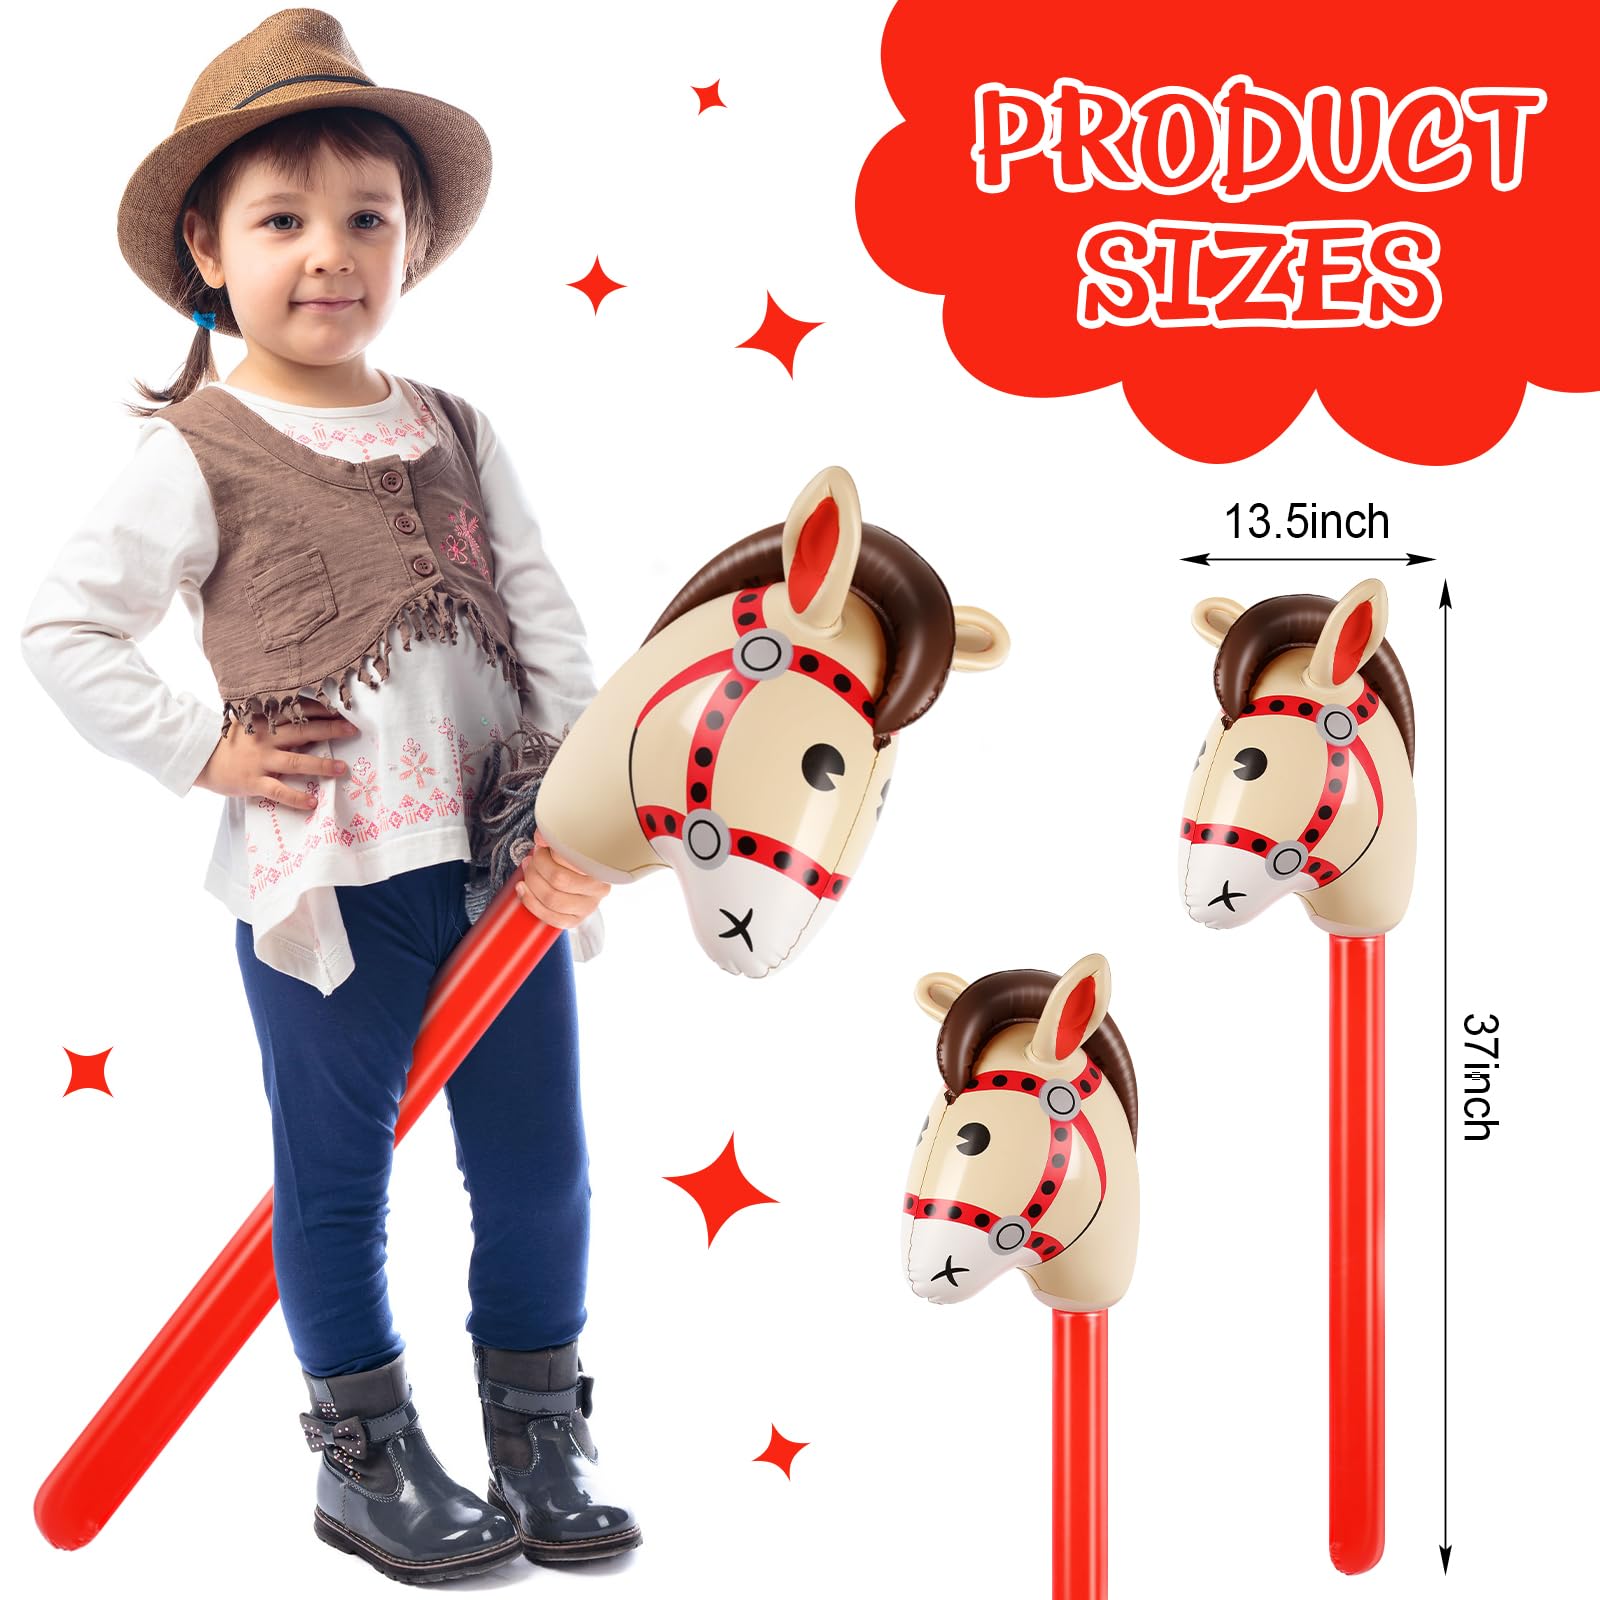 Chivao 30 Pack Inflatable Stick Horse Toy Horse on a Stick Horse Stick Toy Horse Head Stick Balloon Bulk for Cowgirl Cowboy Western Themed Birthday Party Baby Shower Decorations, 37 Inch (Red)